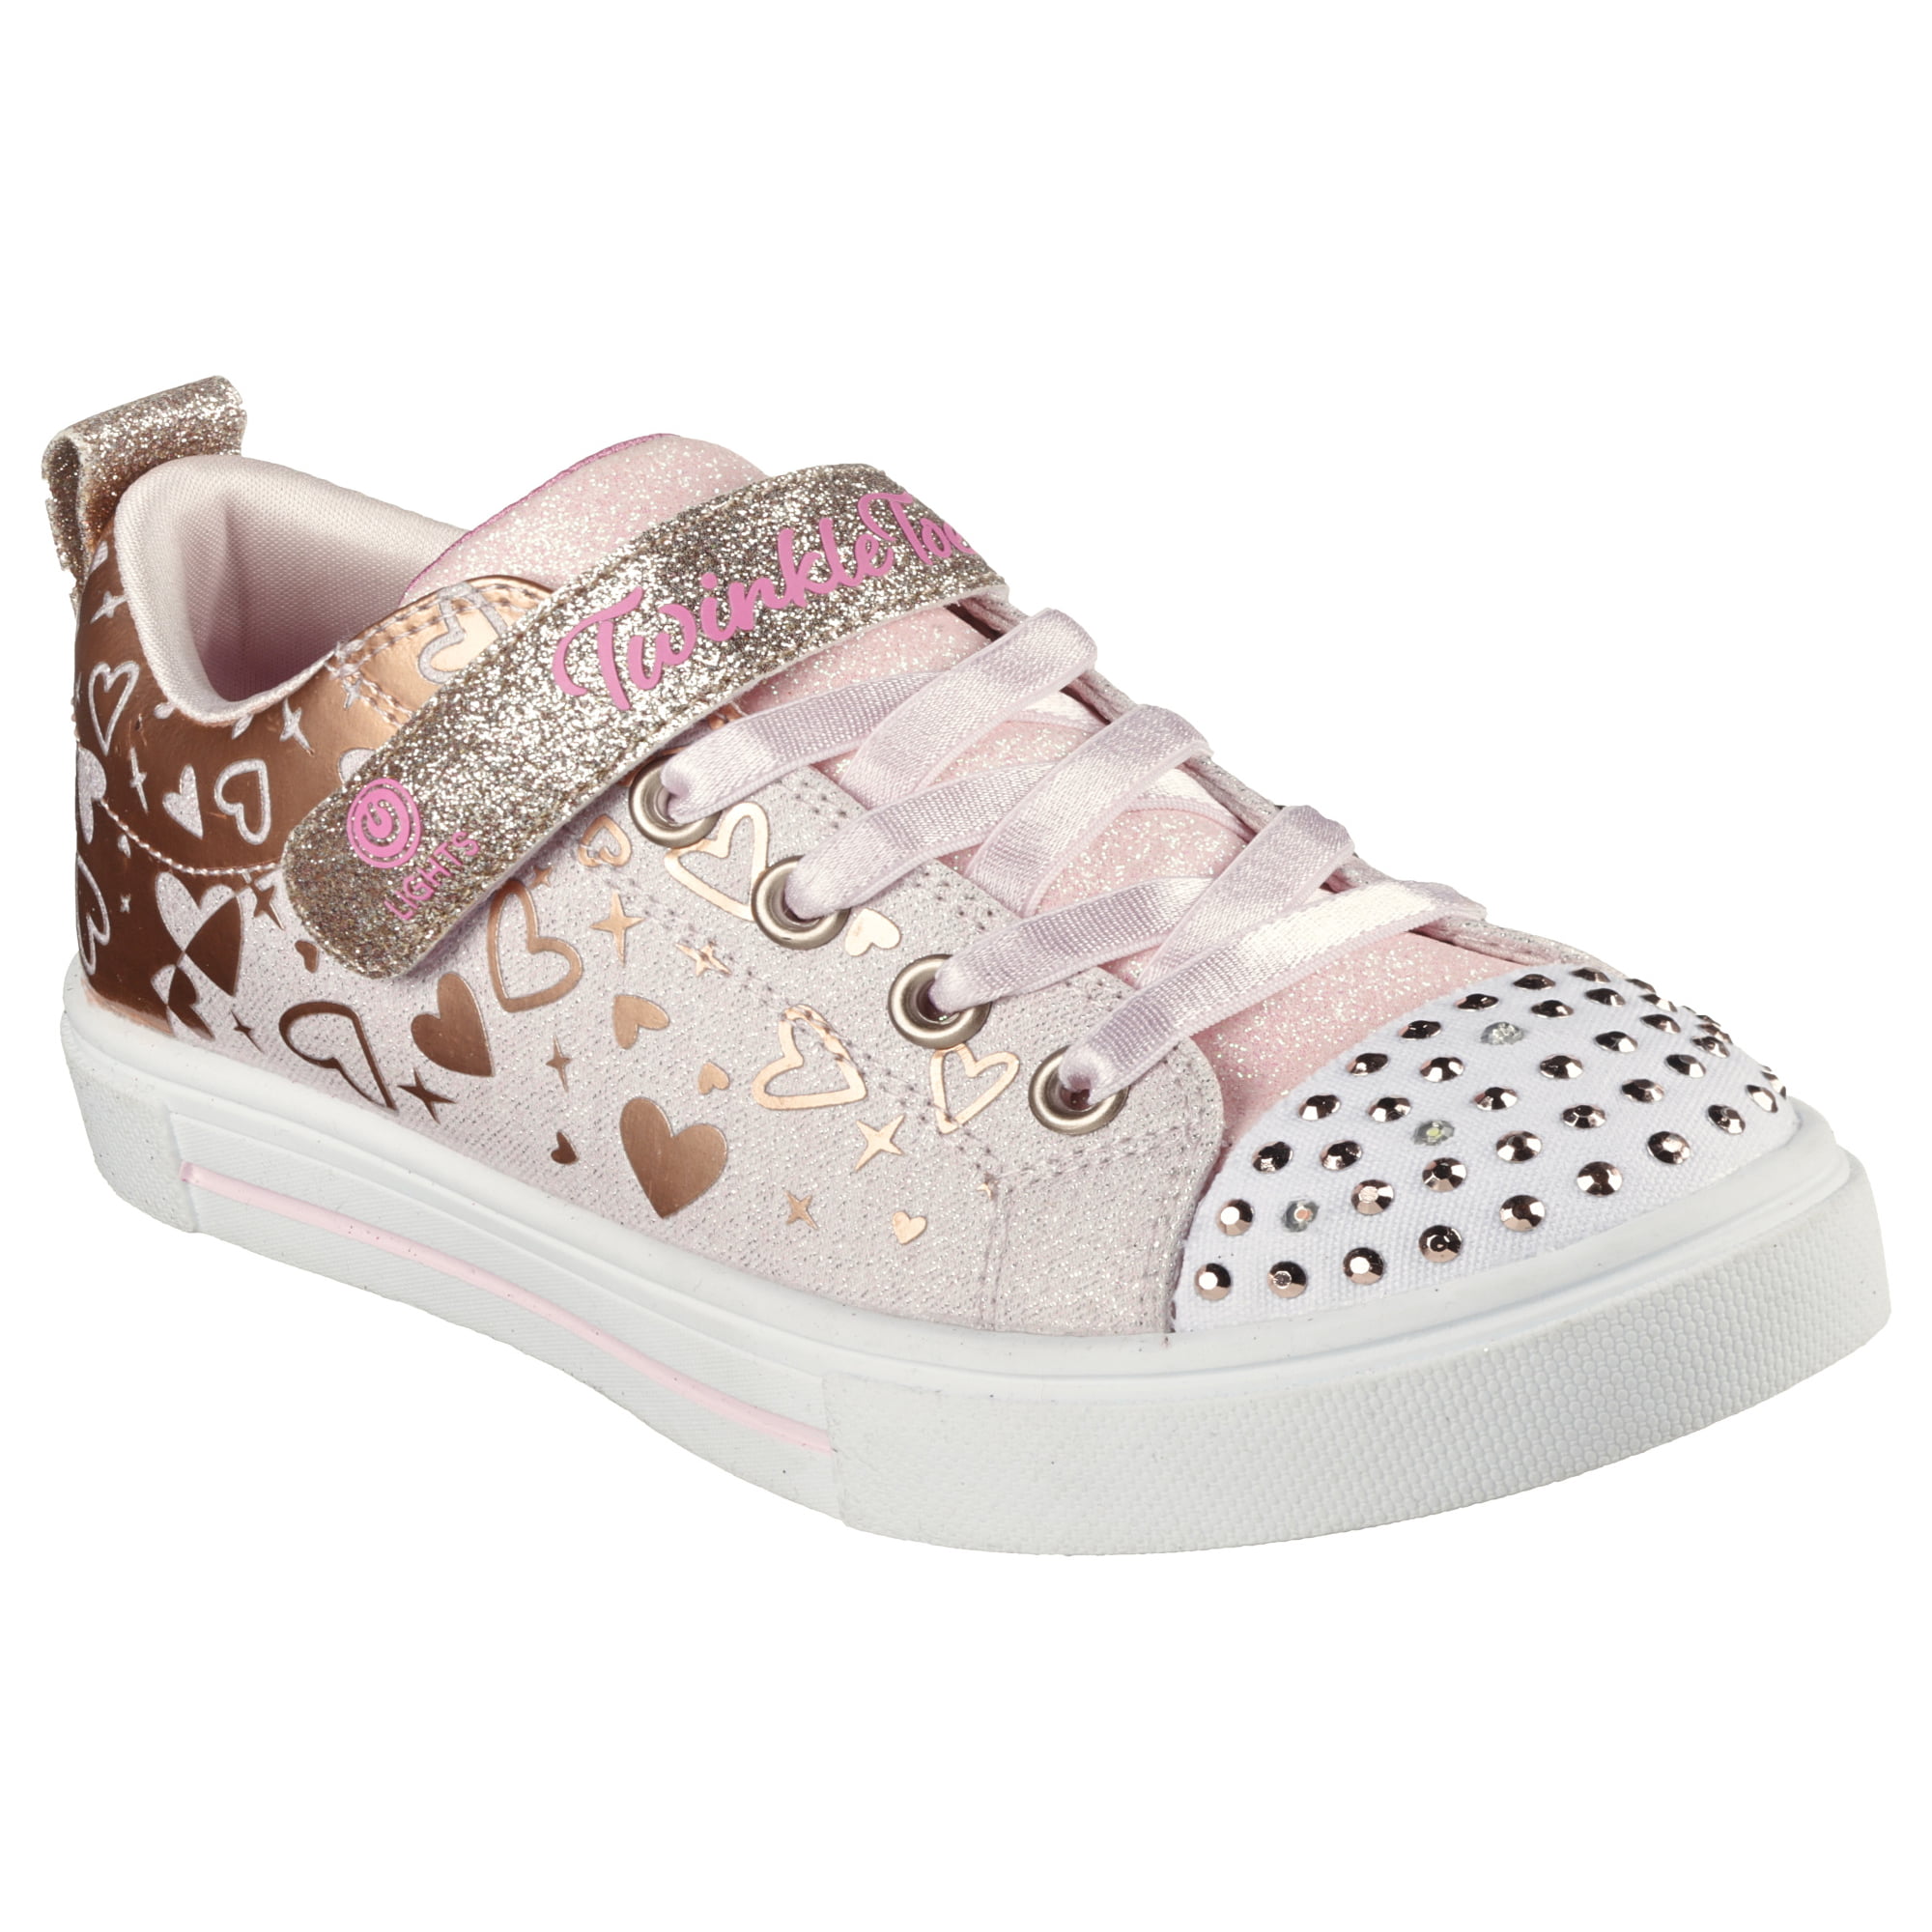 Girls Youth Twinkle Toes Light Up Sneakers - Heather Charm, Sizes 10.5-3 - Walmart.com